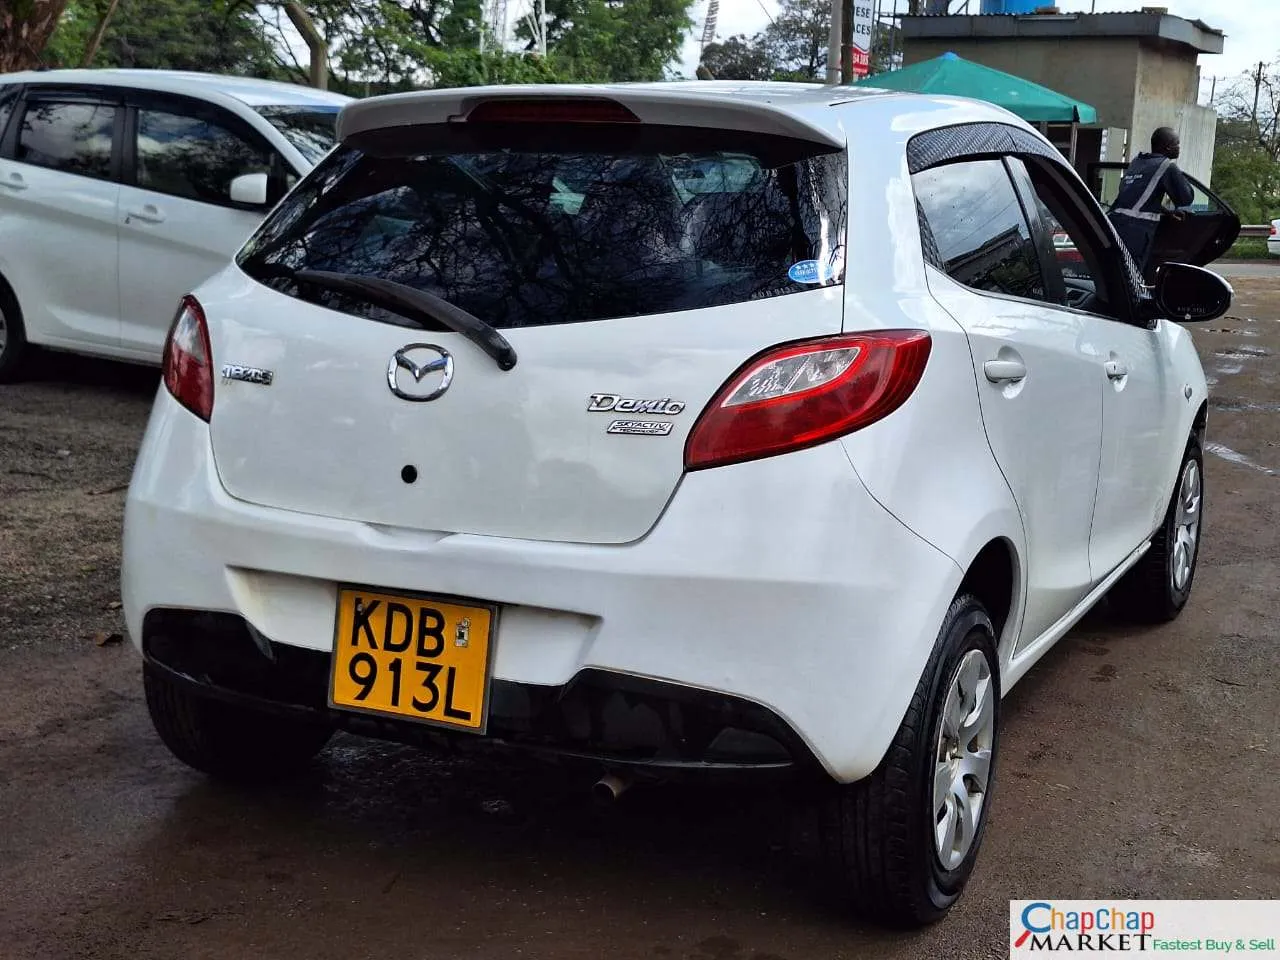 Cars Cars For Sale-Mazda Demio kenya QUICK SALE You Pay 30% DEPOSIT demio for sale in kenya hire purchase installments TRADE IN OK EXCLUSIVE 🔥 8